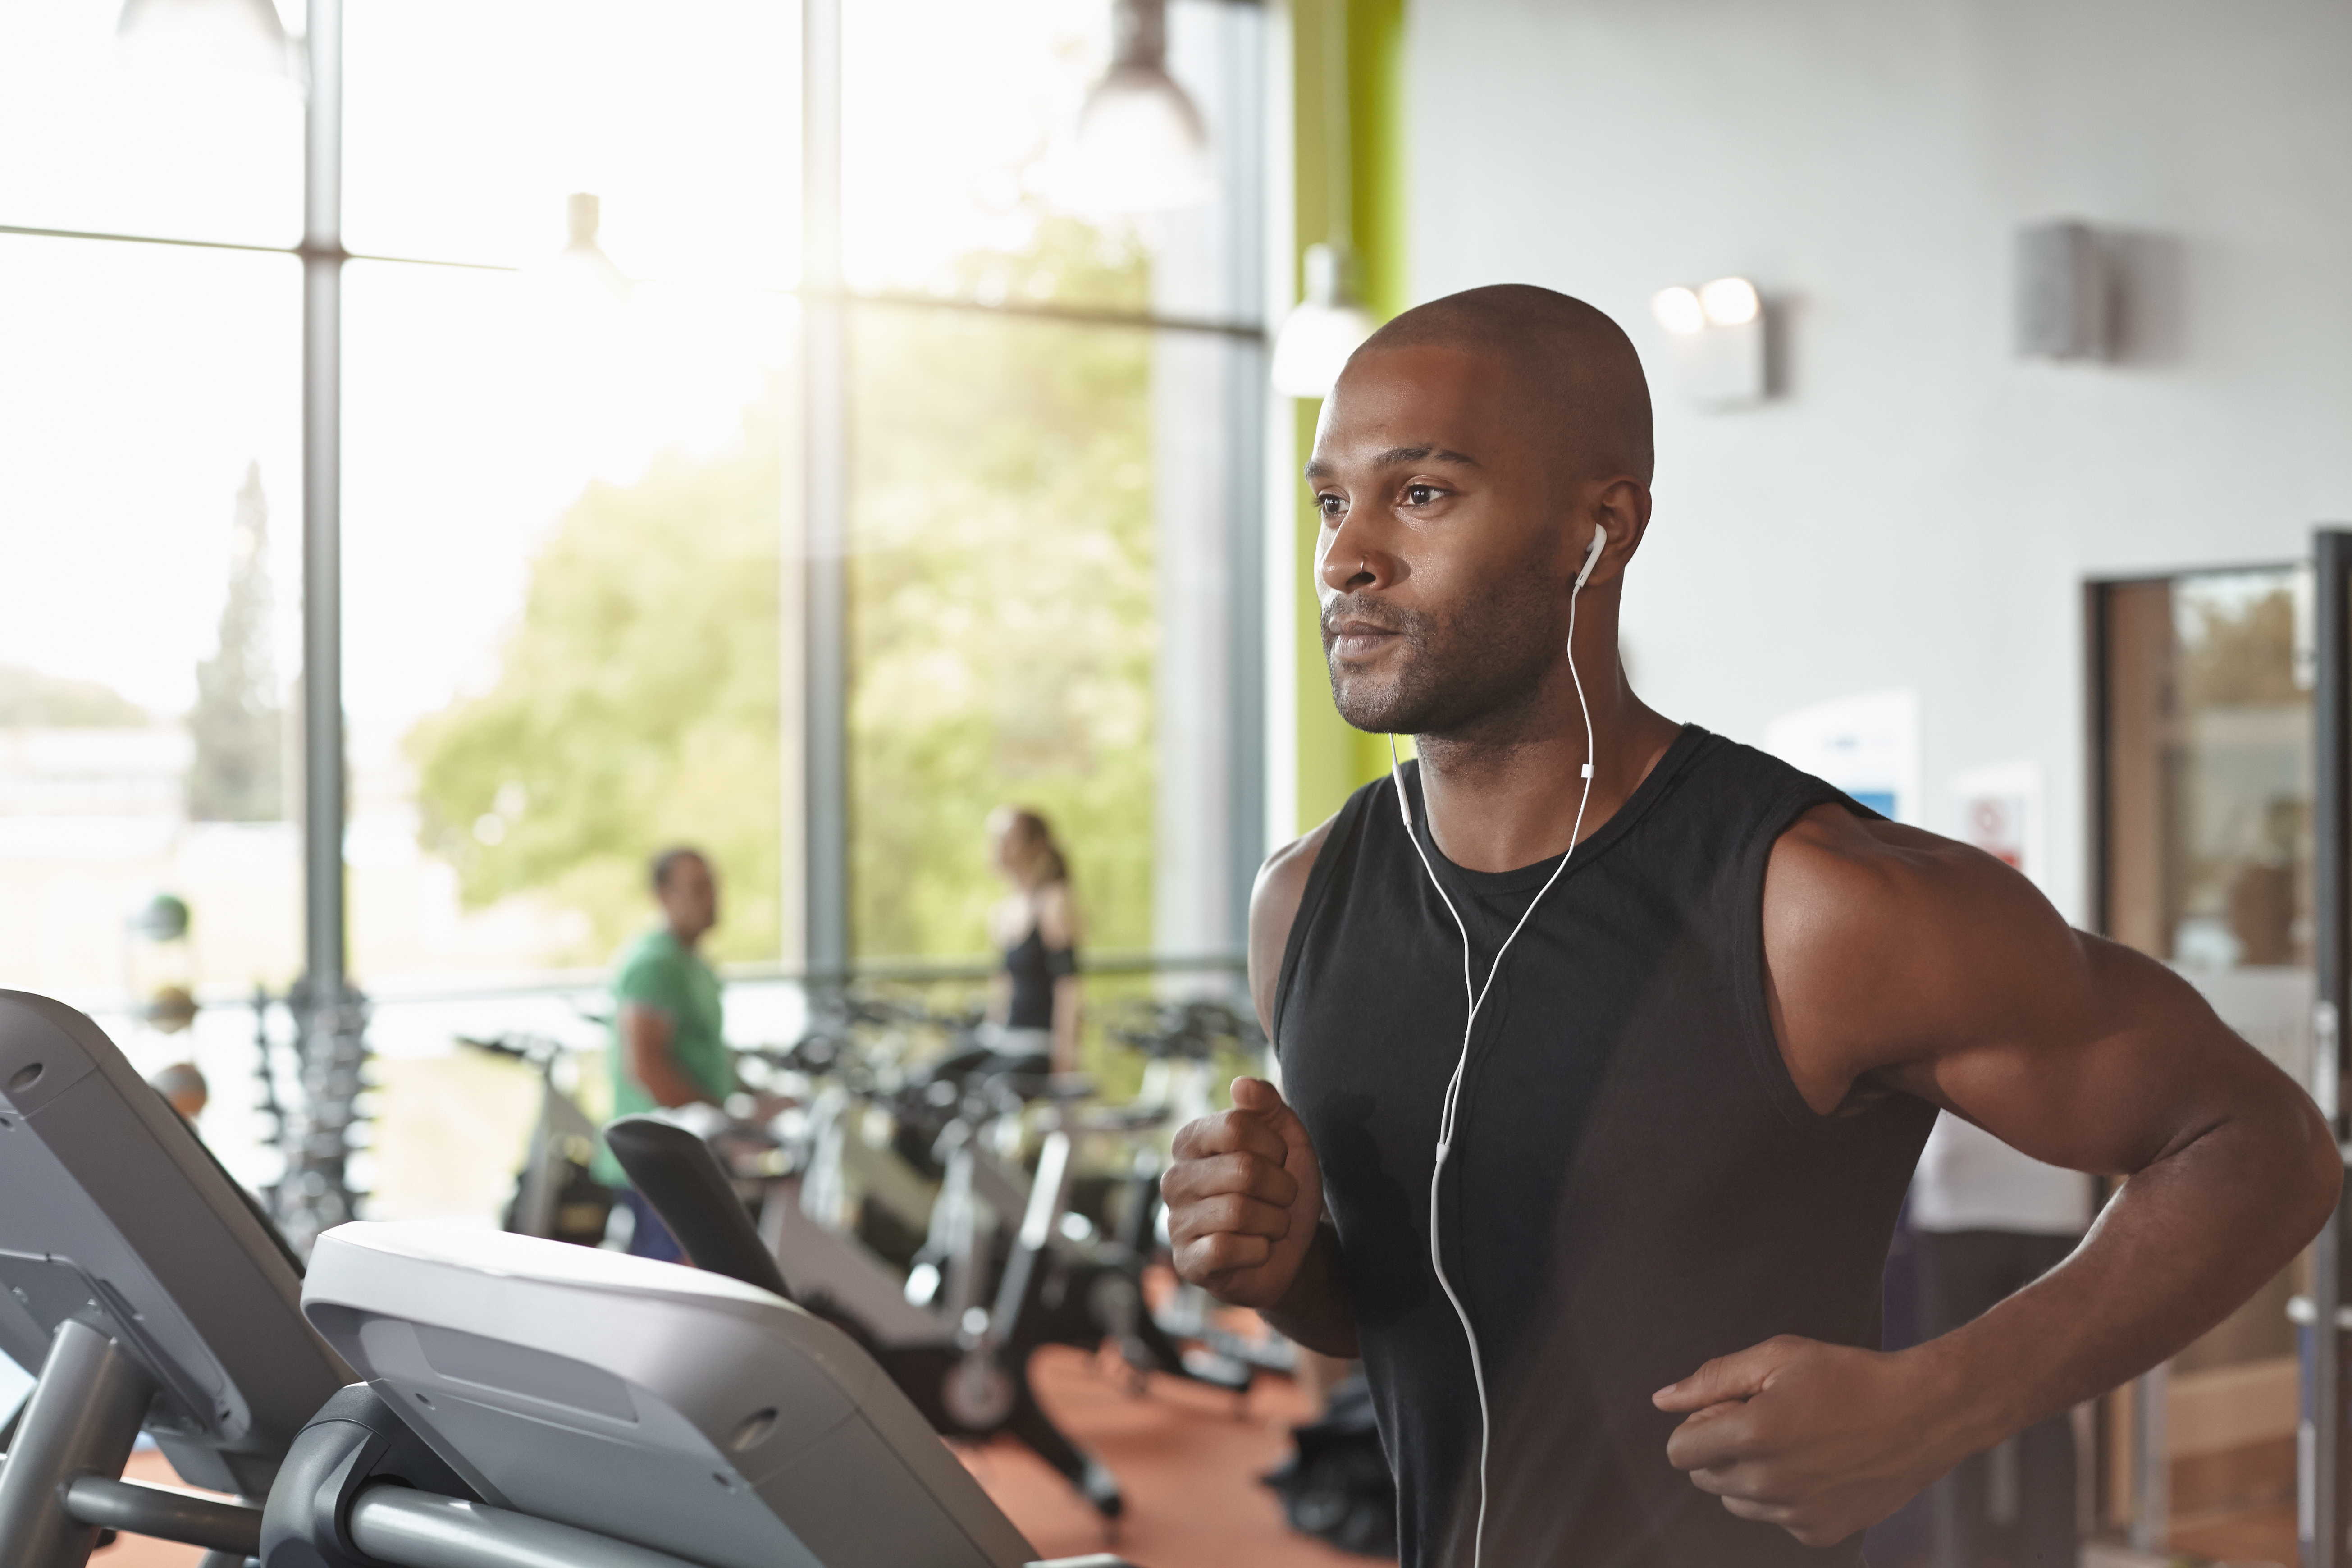 Music Workout Playlist Scientifically Proven to Motivate